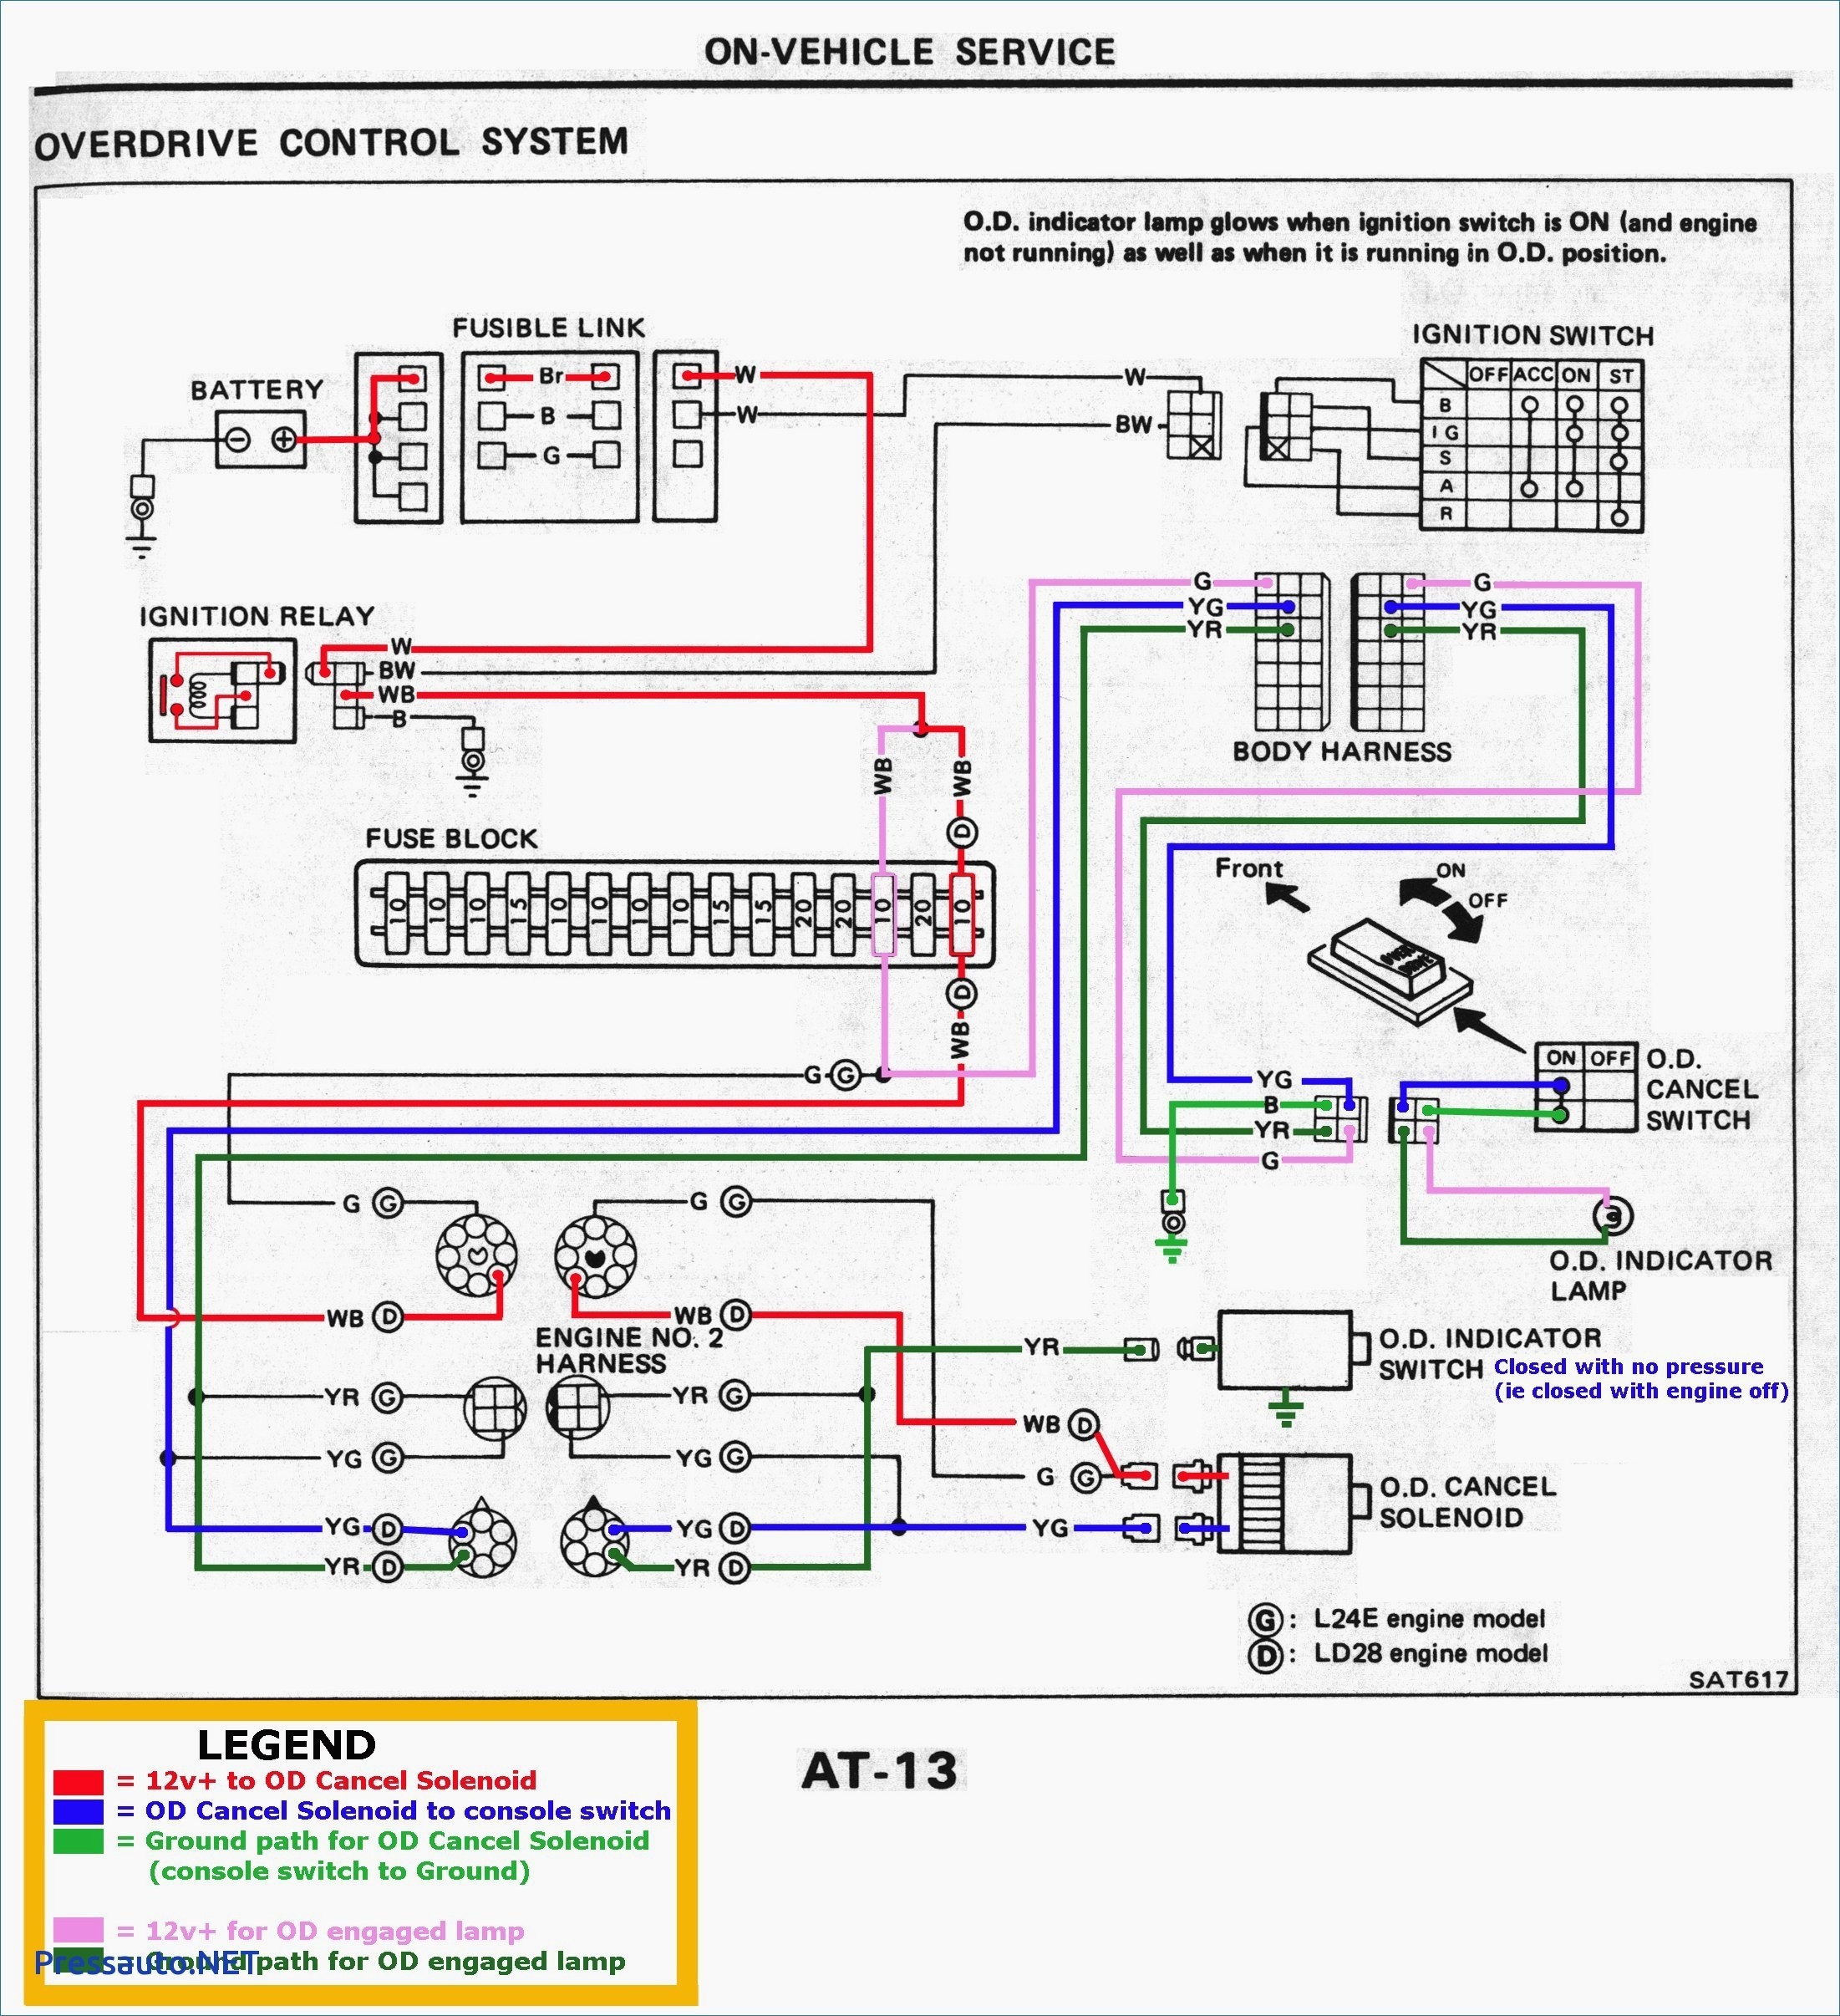 wiring diagrams for toyota corolla best toyota wiring diagram color rh ipphil Lifan 125Cc Wiring